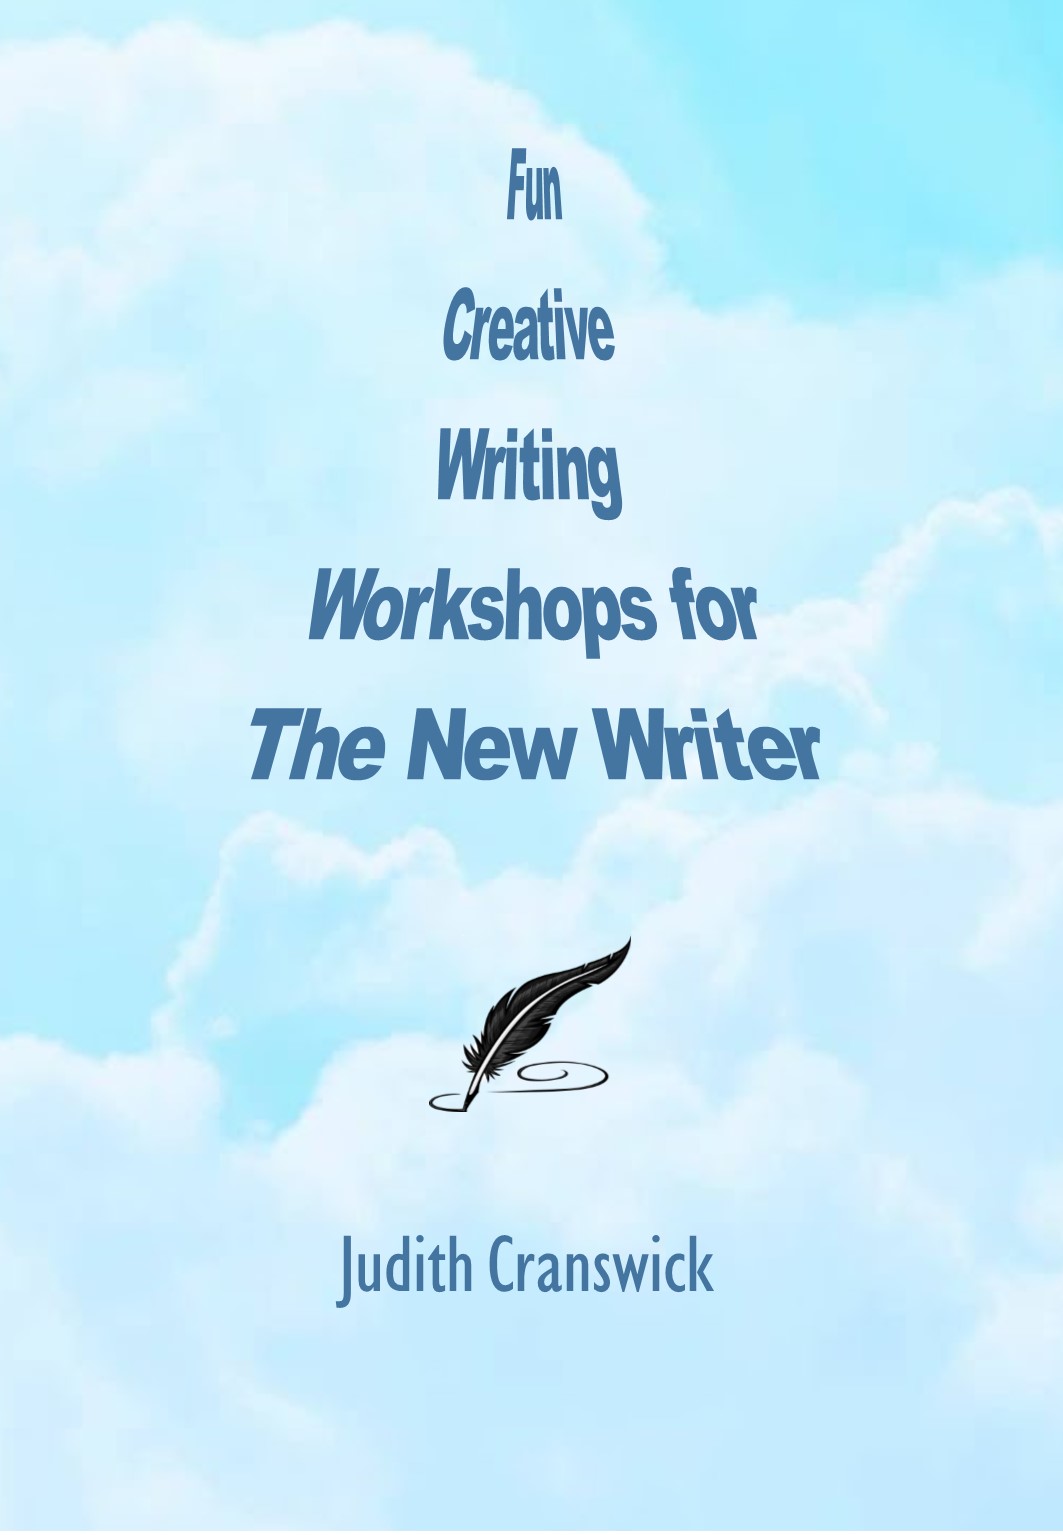 FREE: Fun Creative Workshops for the New Writer by Judith Cranswick